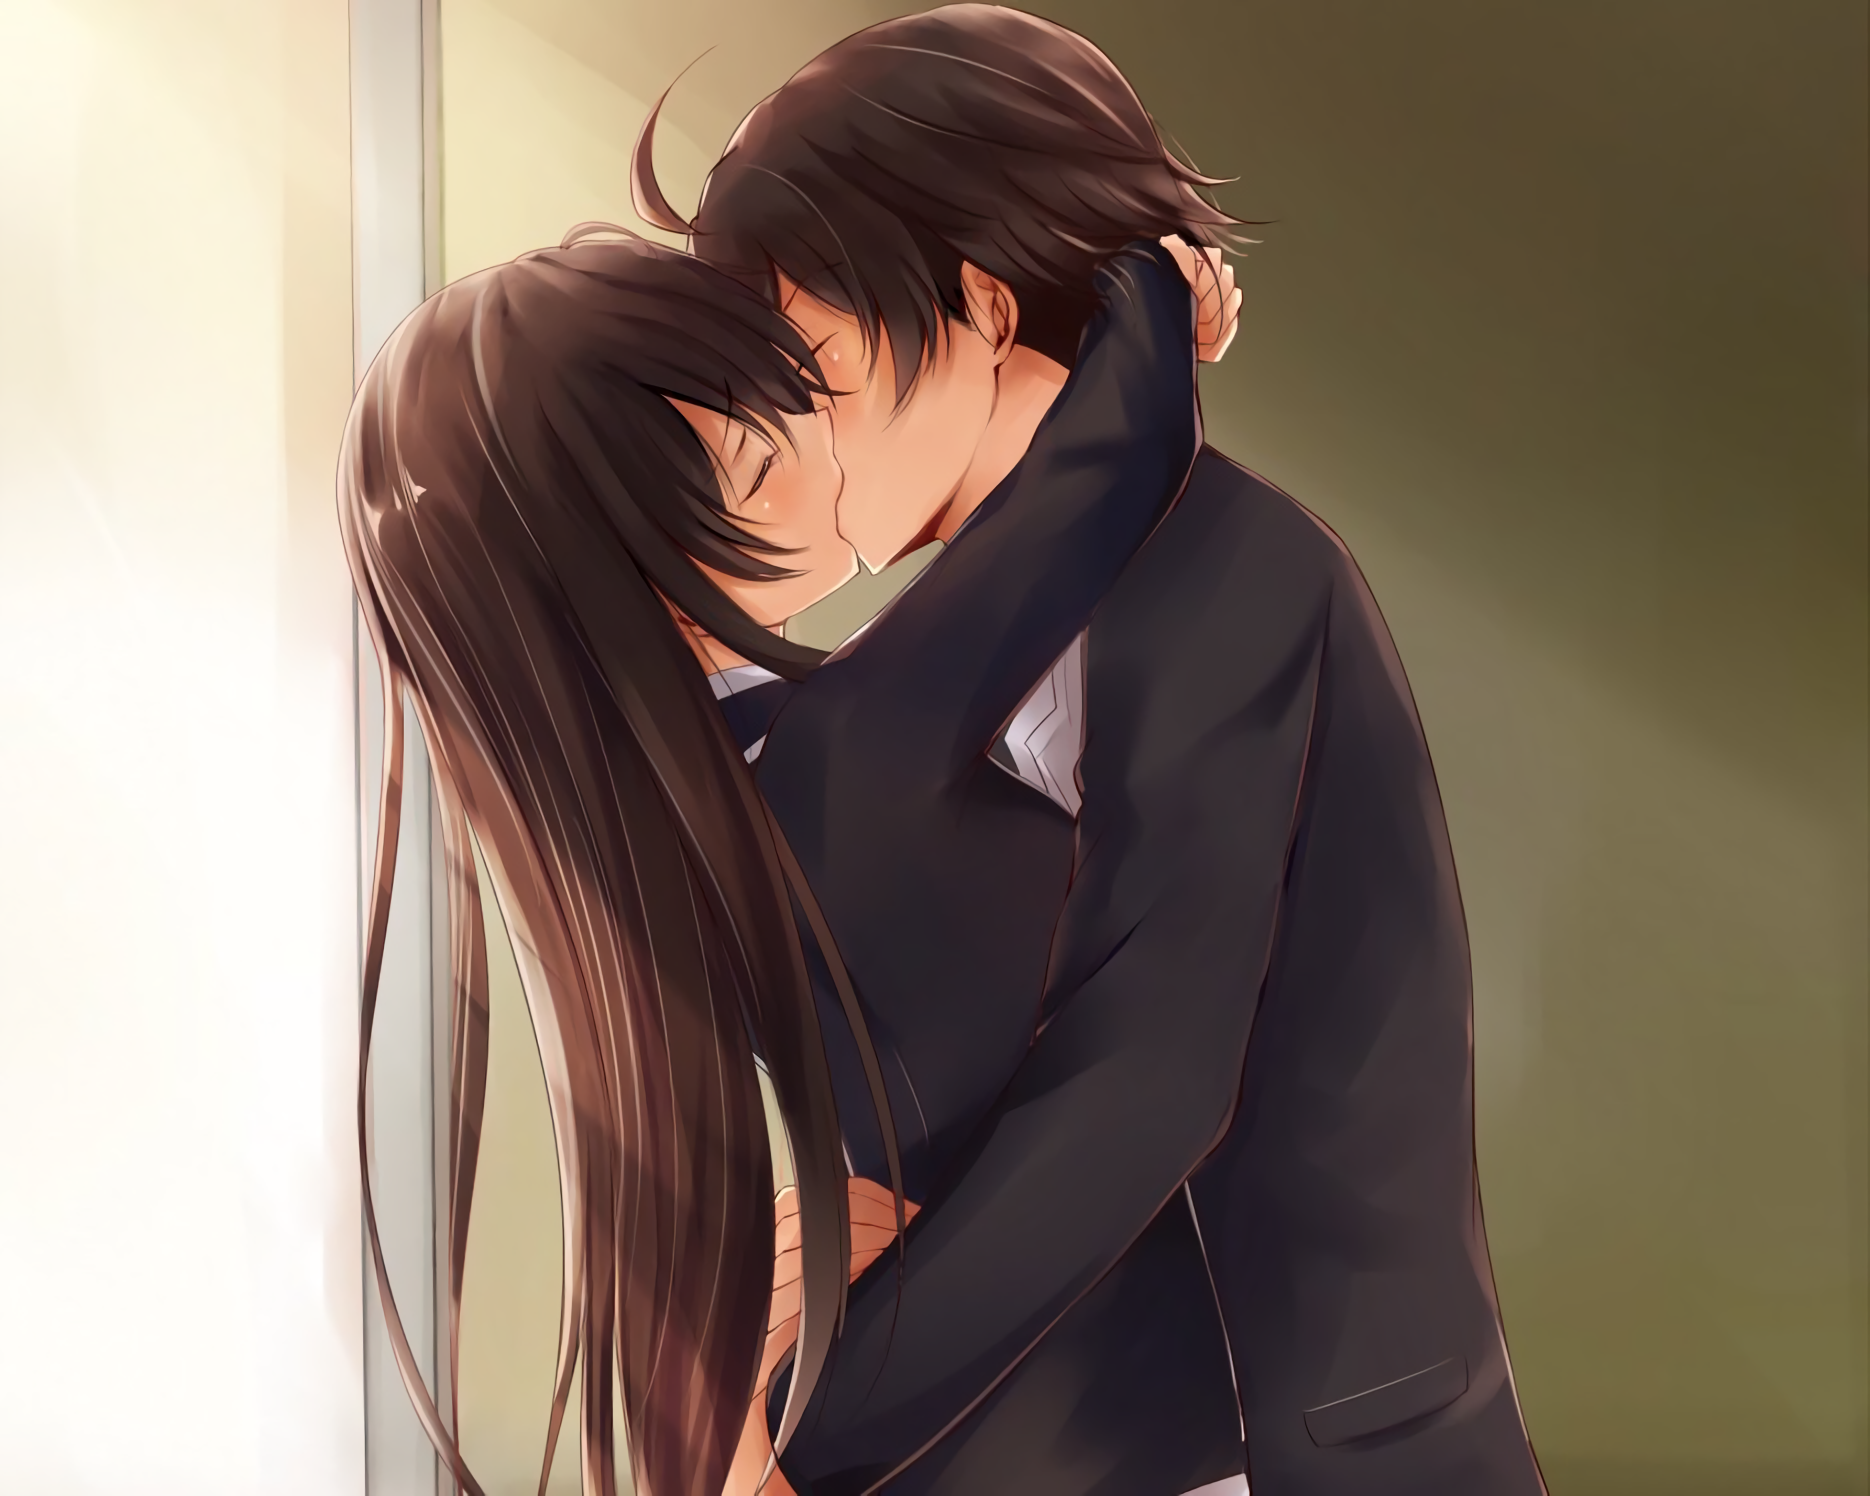 Kissing Anime Wallpapers Wallpaper Cave 3525